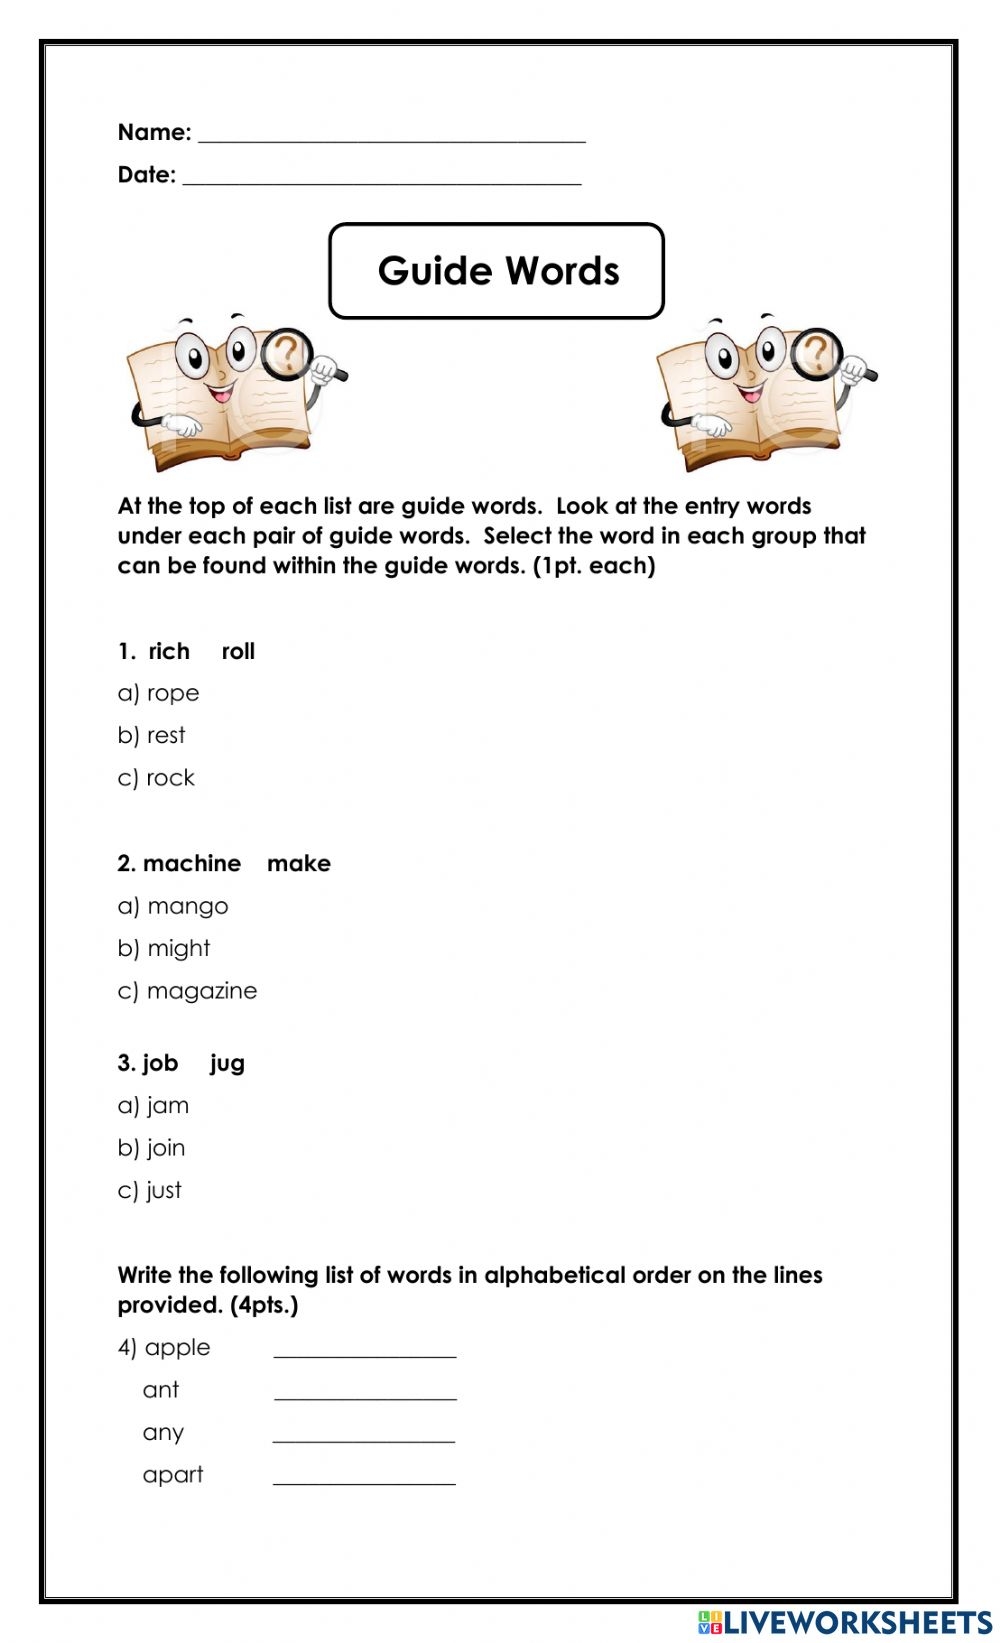 Dictionary Usage Worksheet For Students